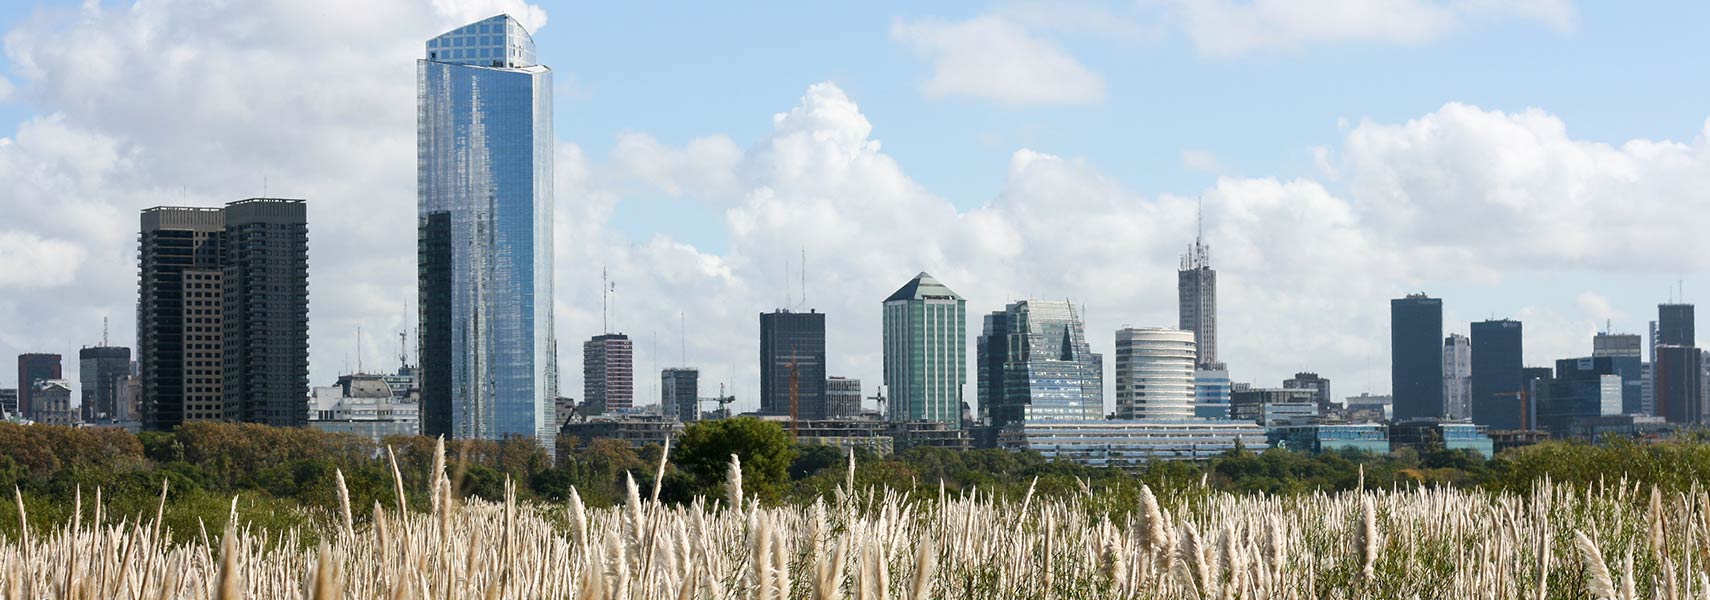 Buenos Aires skyline from Costanera Sur Ecological Reserve.